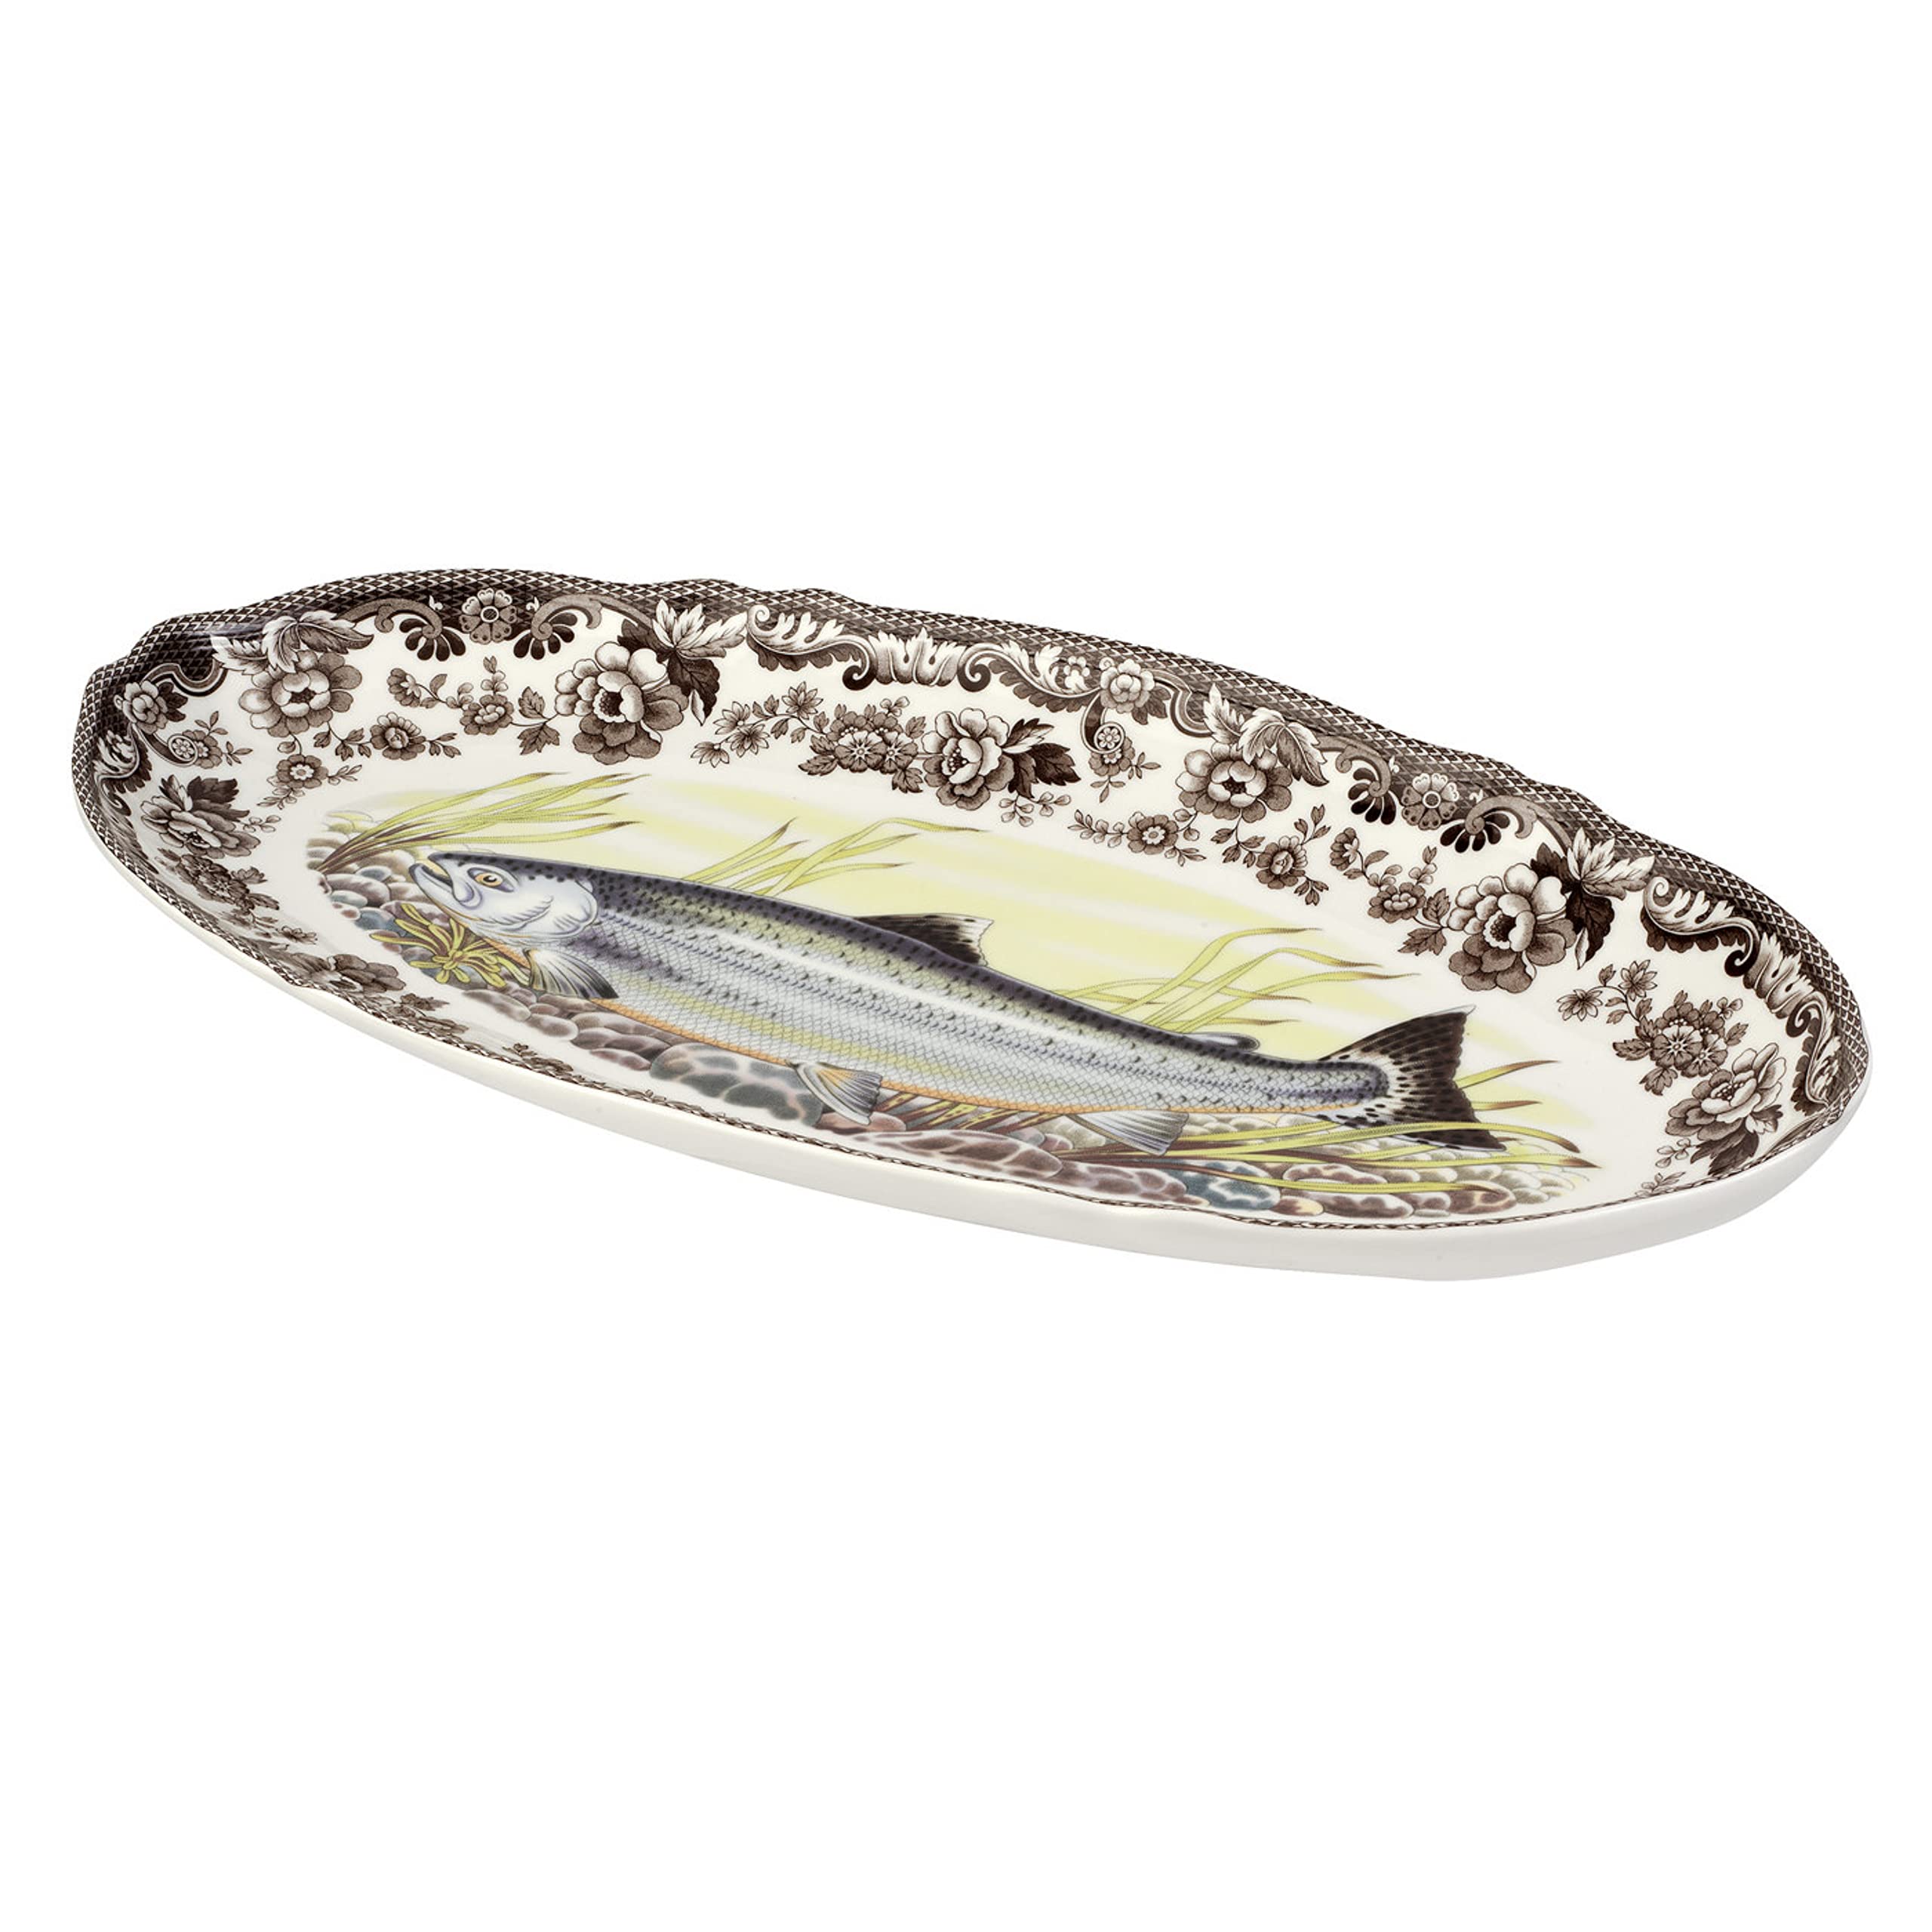 Spode Woodland Fish Platter with King Salmon Motif | 18.5" Fish Serving Platter | Large Oval Tray Made from Fine Porcelain | Microwave and Dishwasher Safe